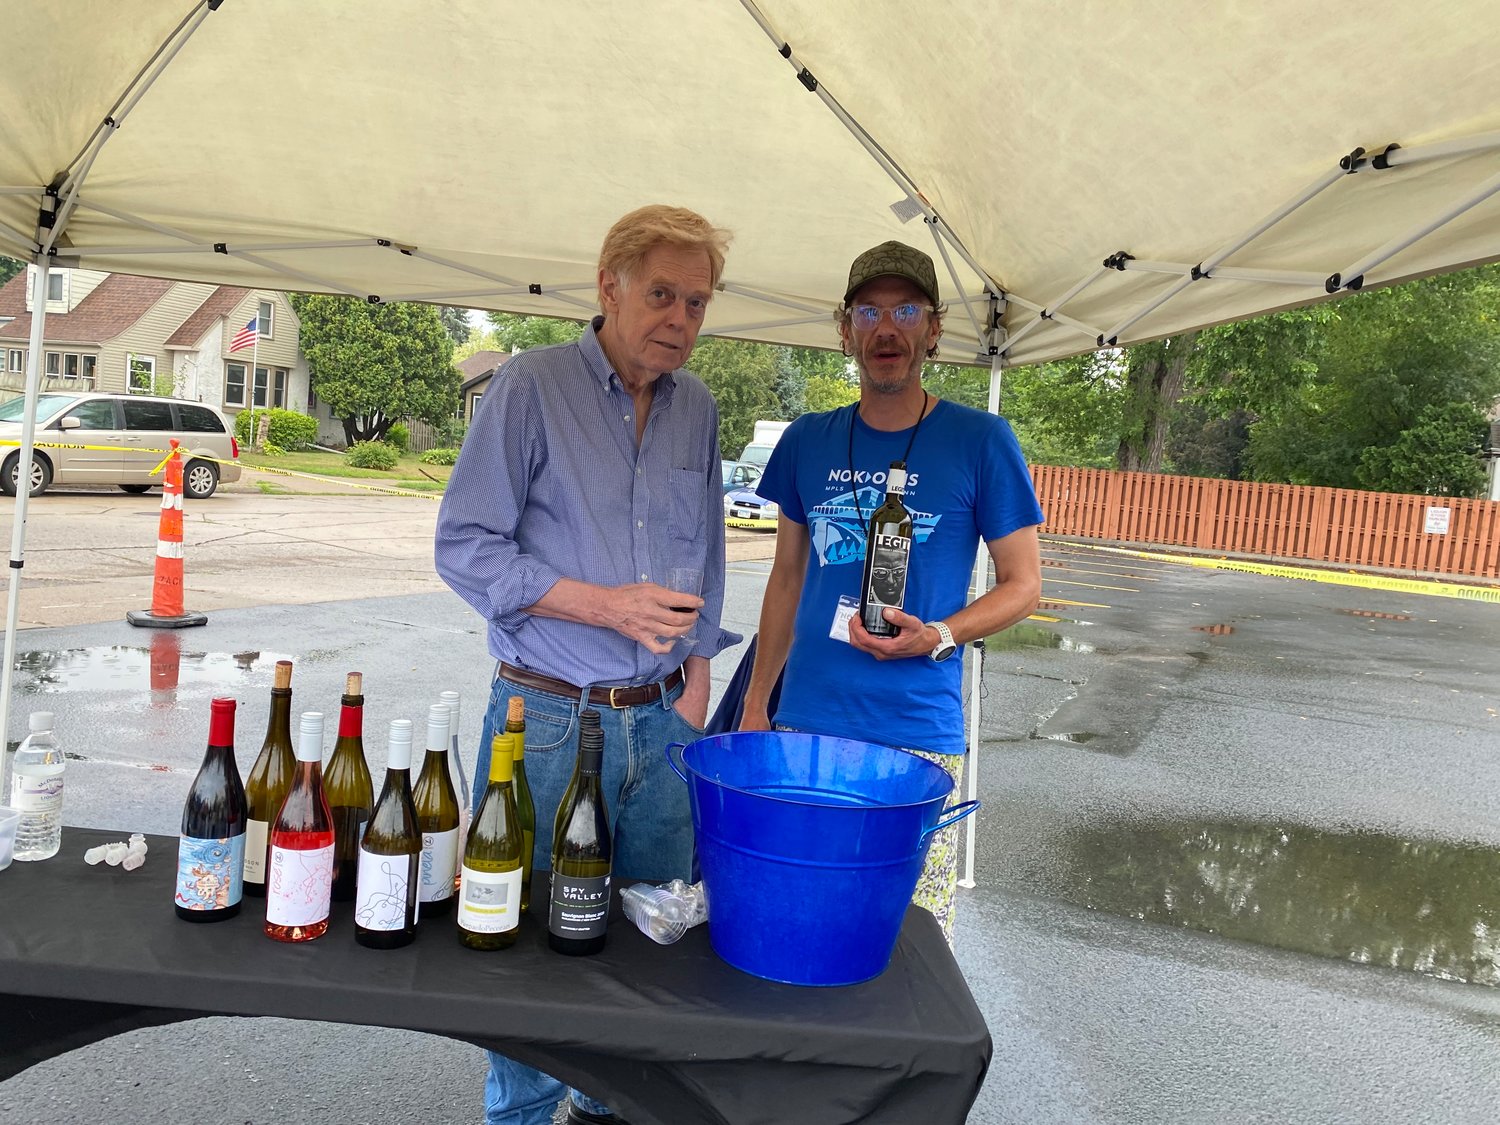 Tom Gill of New France Wine Company (left) and Nick Daugherty of McDonald's Liquor during the beer and wine tasting event at McDonald's on Saturday, Aug. 7.